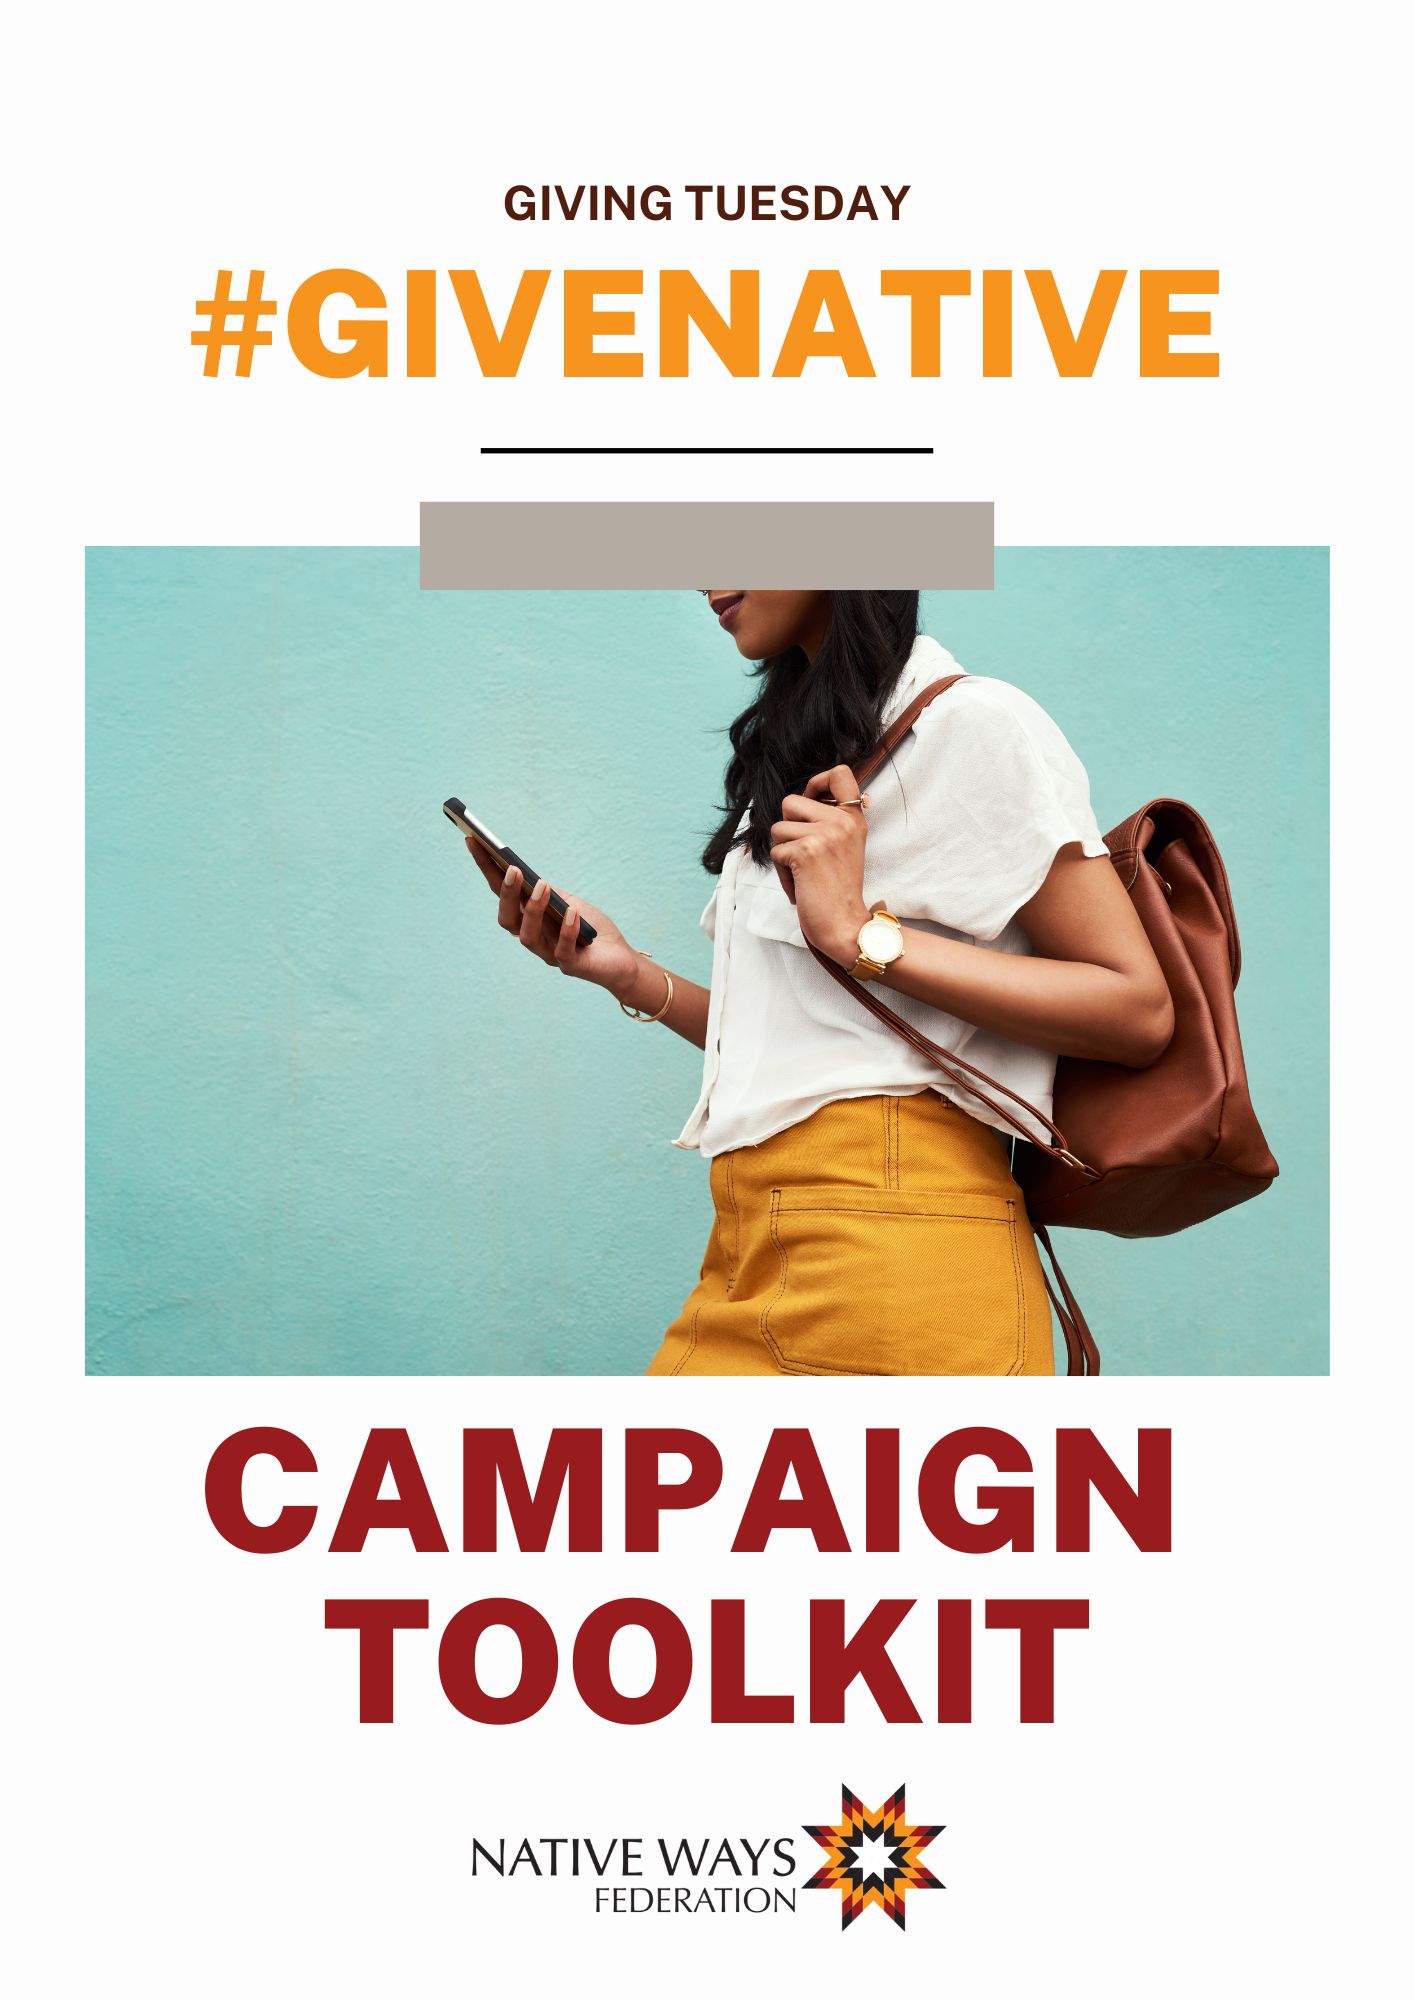 Clickable givingtuesday image that leads to a give native campaign toolkit sign up